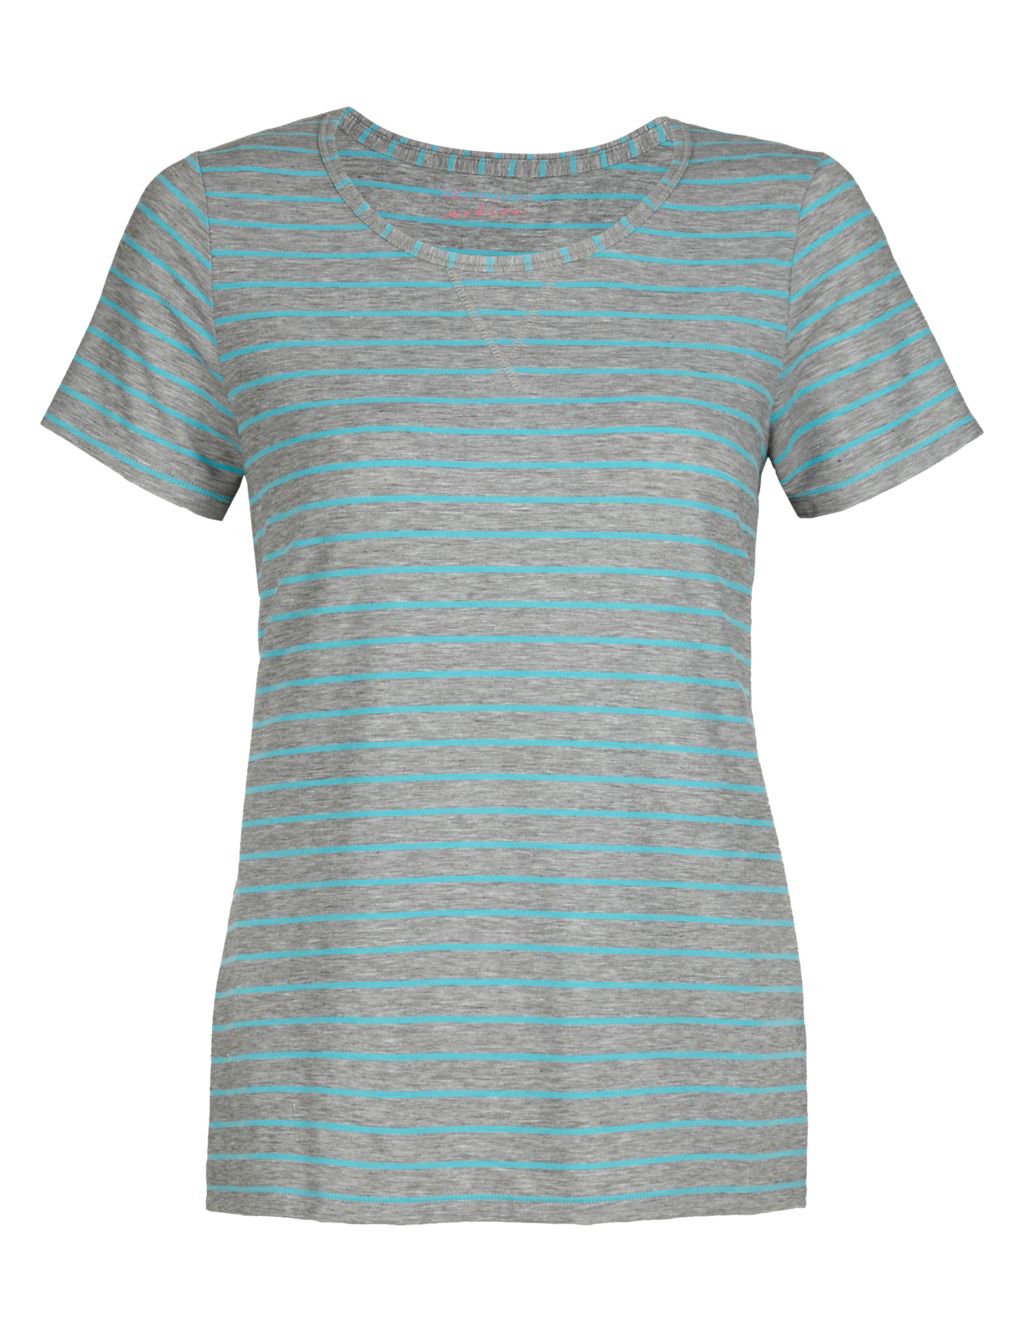 Active Performance Short Sleeve Striped T-Shirt 1 of 5